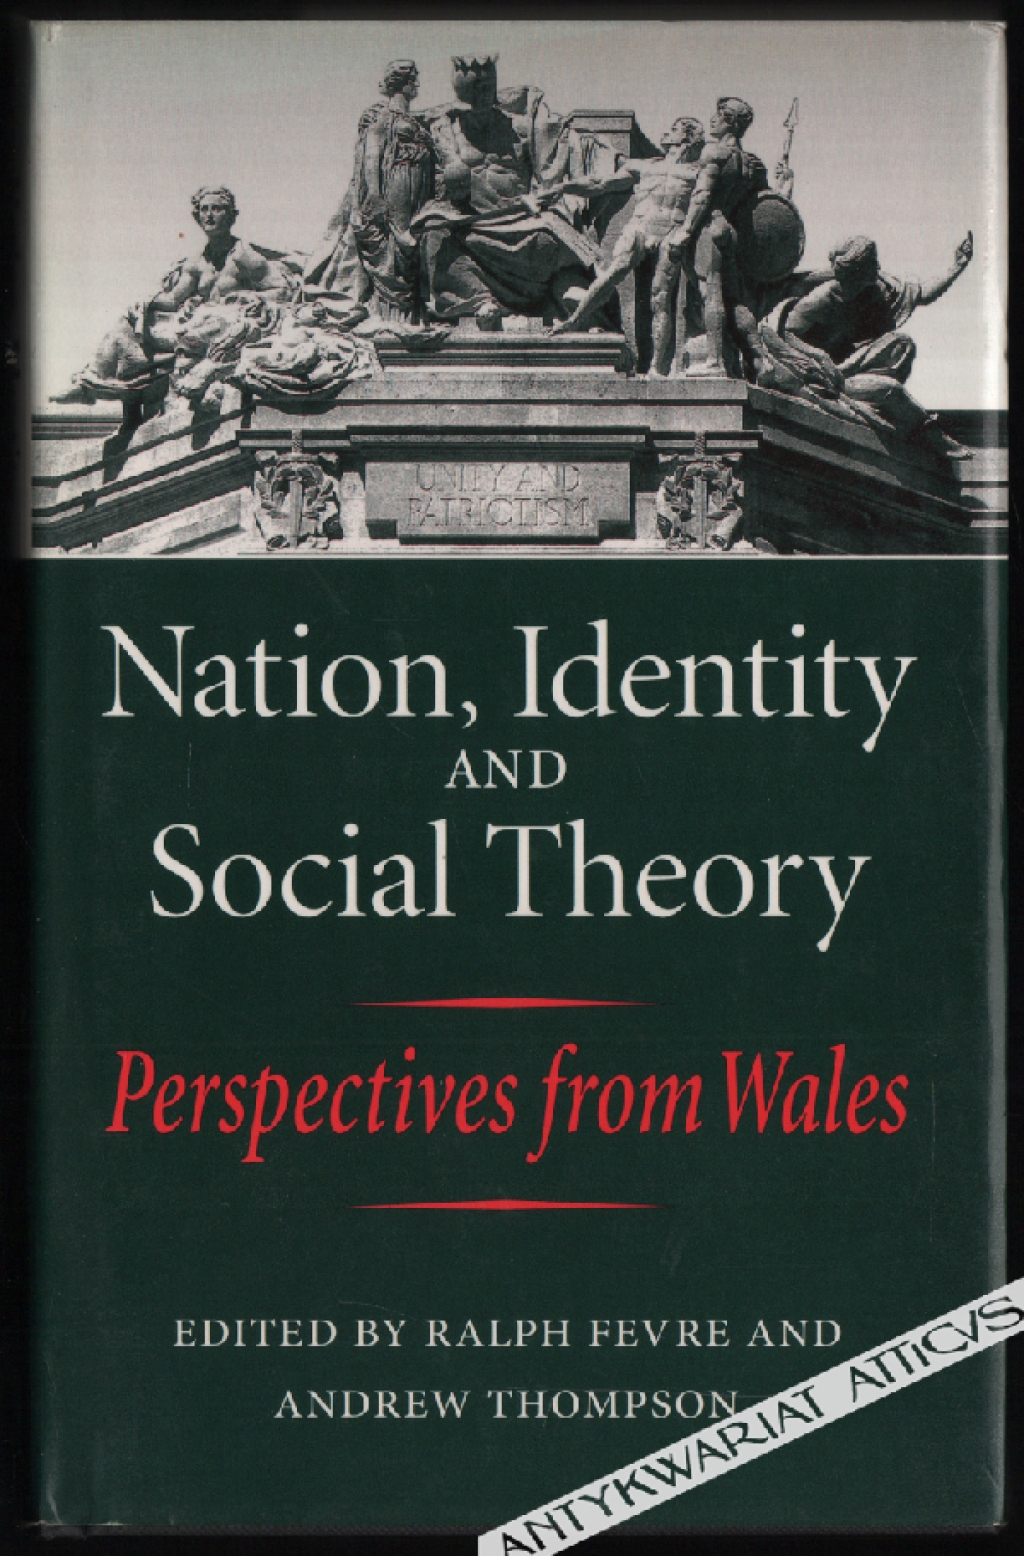 Nation, Identity and Social Theory. Perspectives from Wales